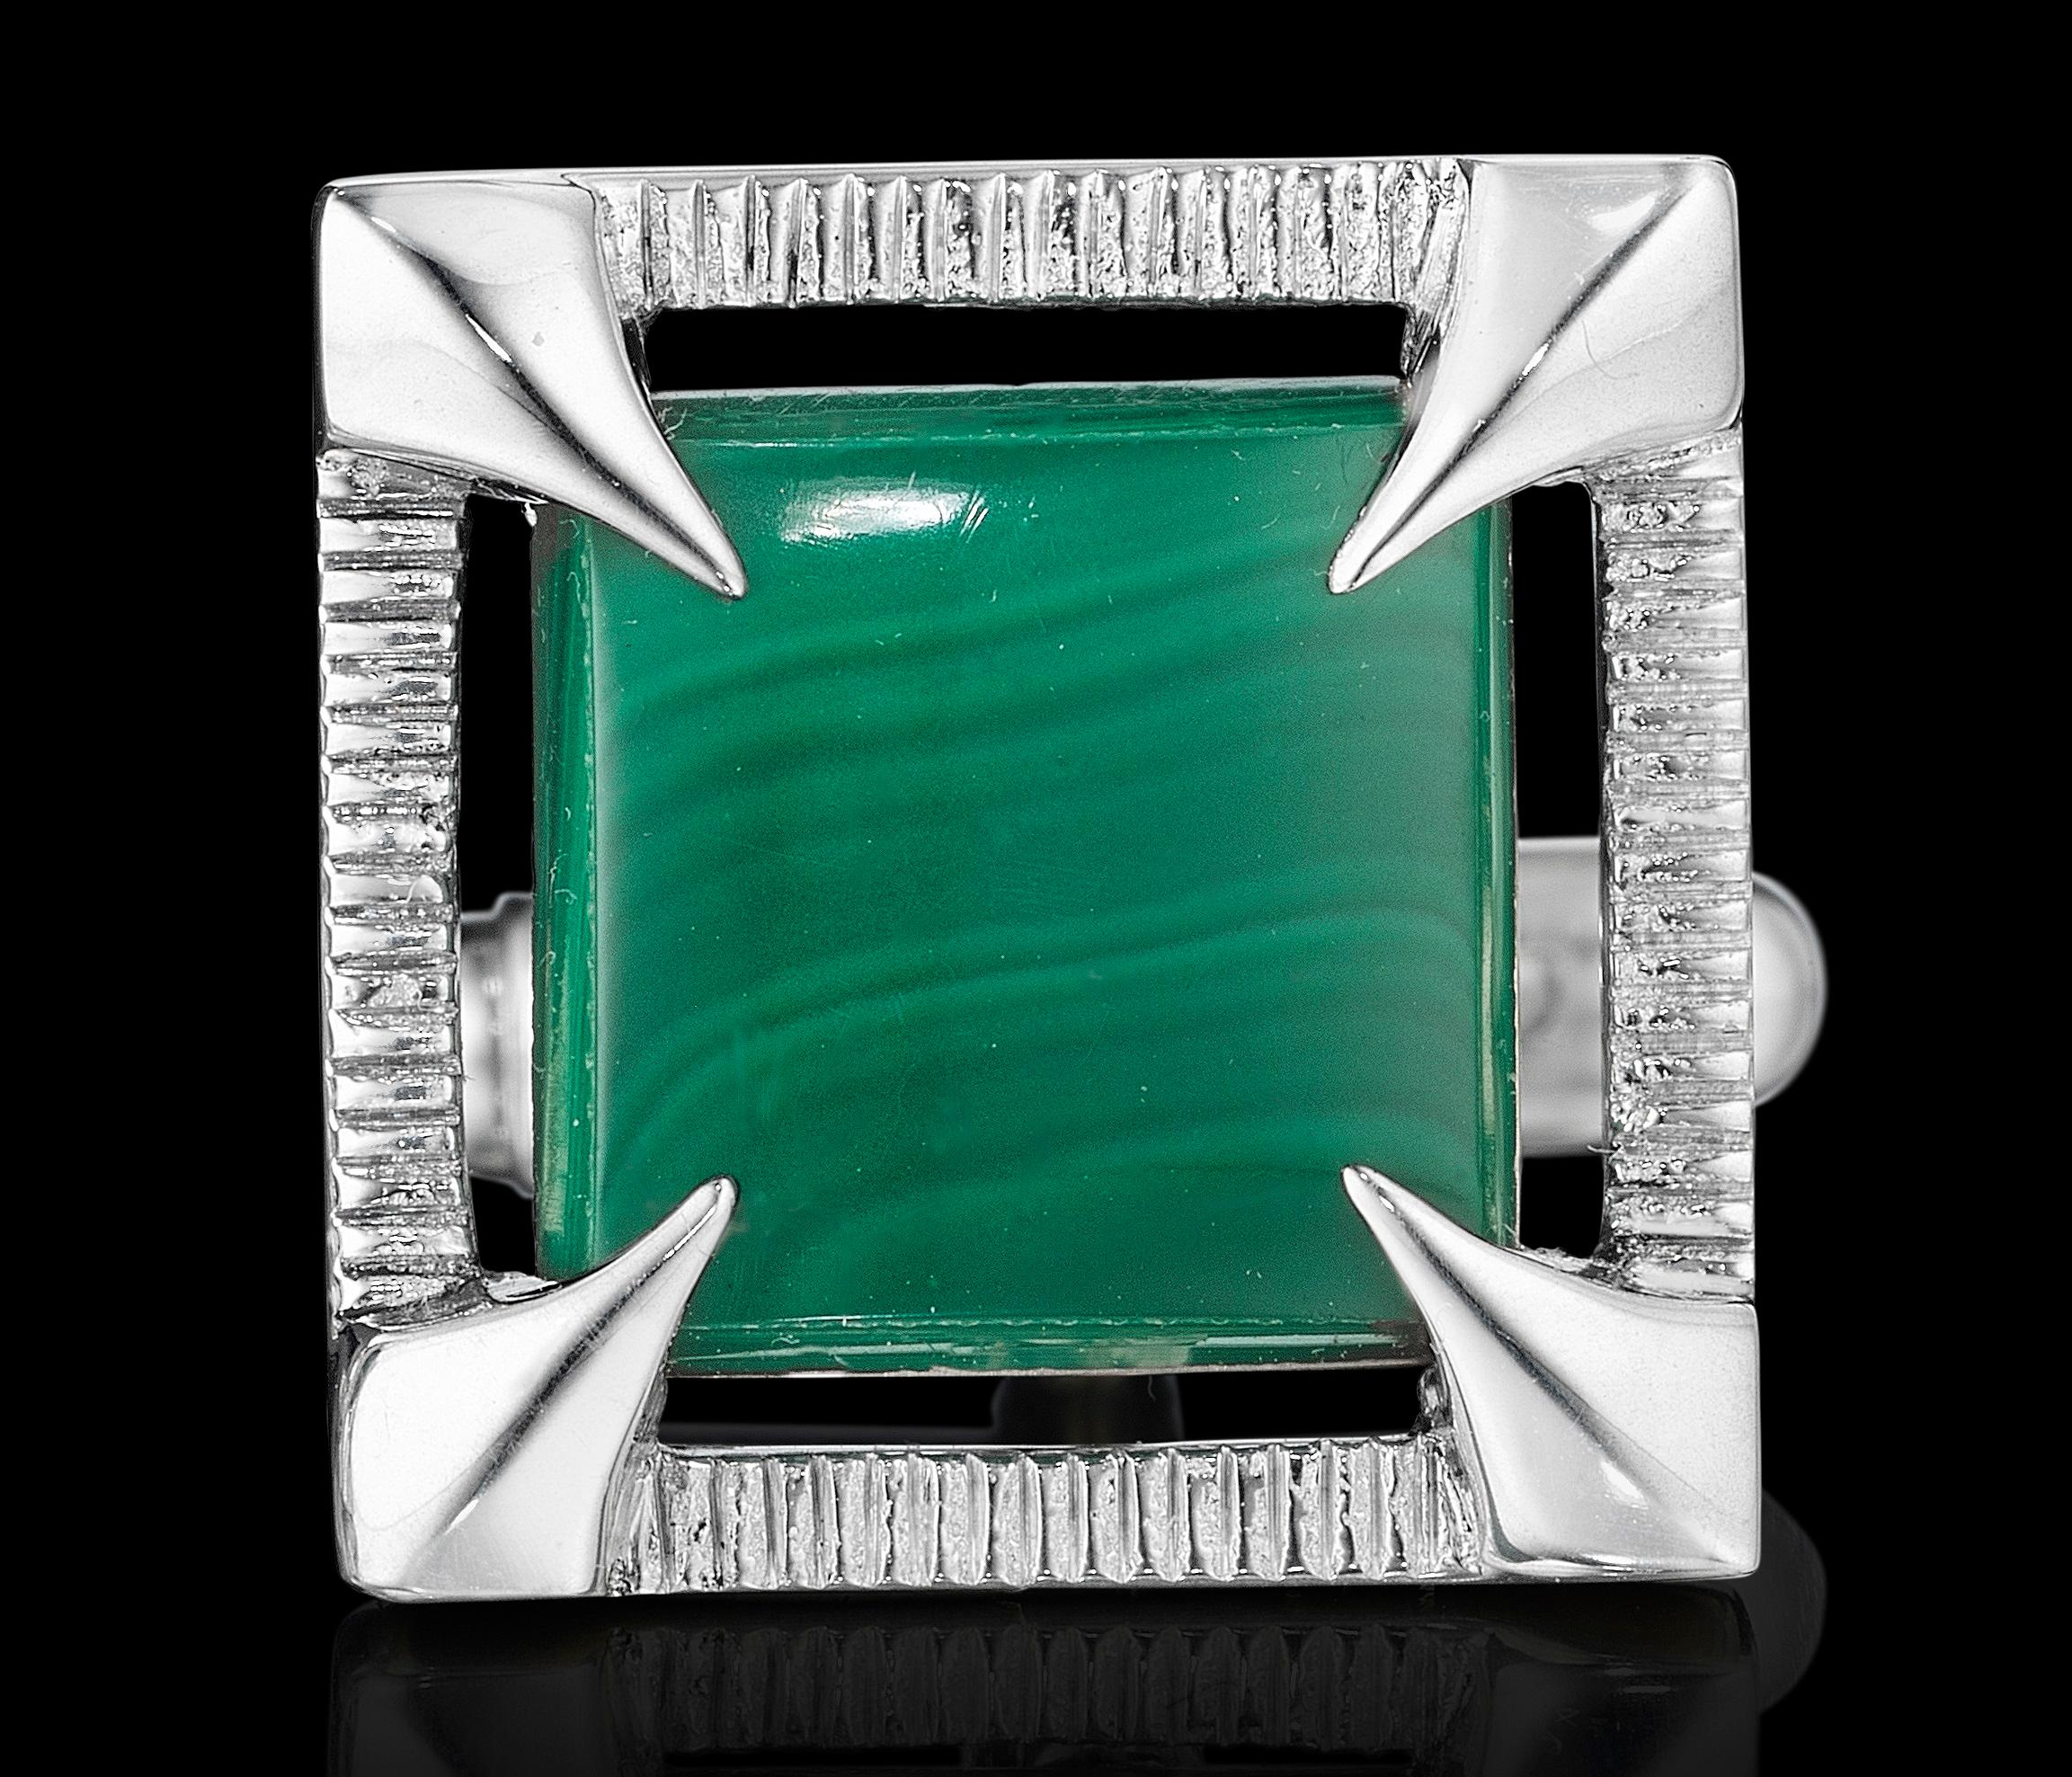 Yoki Sophisticated Malachite Sterling Silver Cufflinks In New Condition For Sale In Annandale, VA